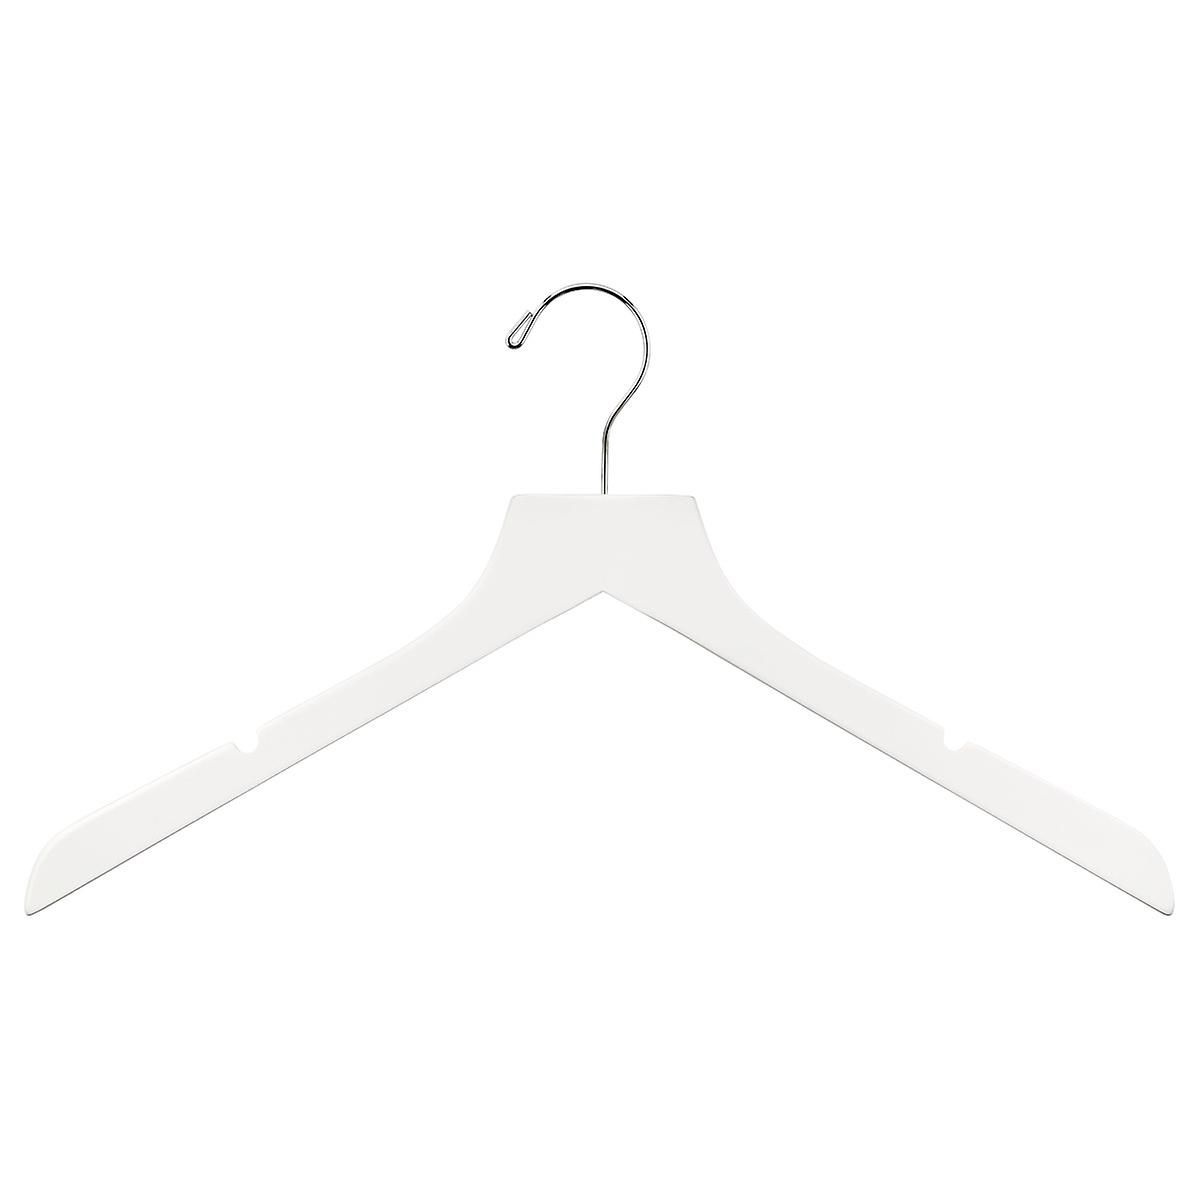 Case of 120 Slim Wooden Shirt Hanger w/ Notches White | The Container Store